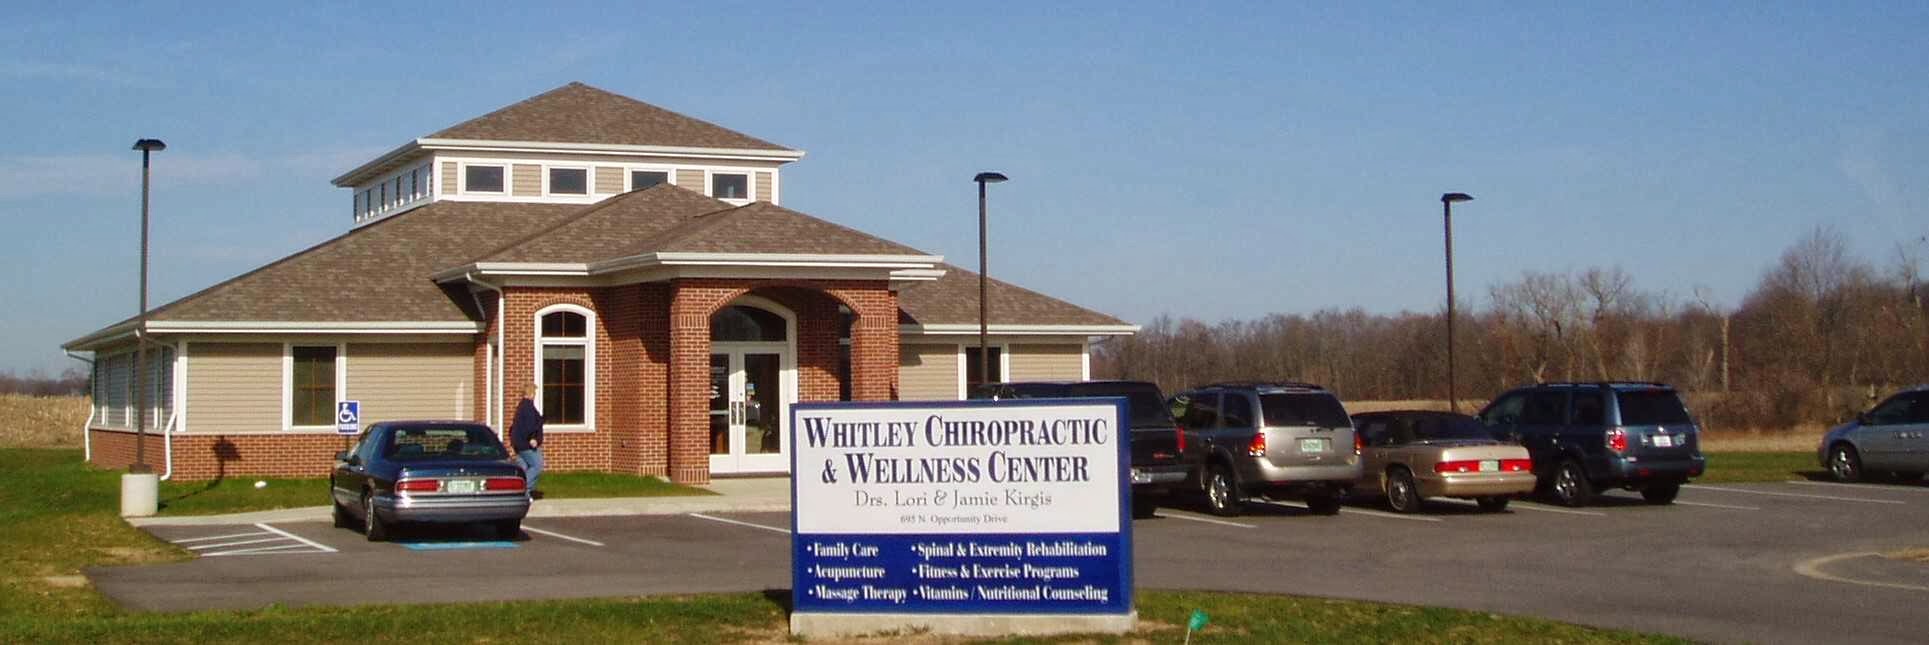 Whitley Chiropractic and Wellness Center